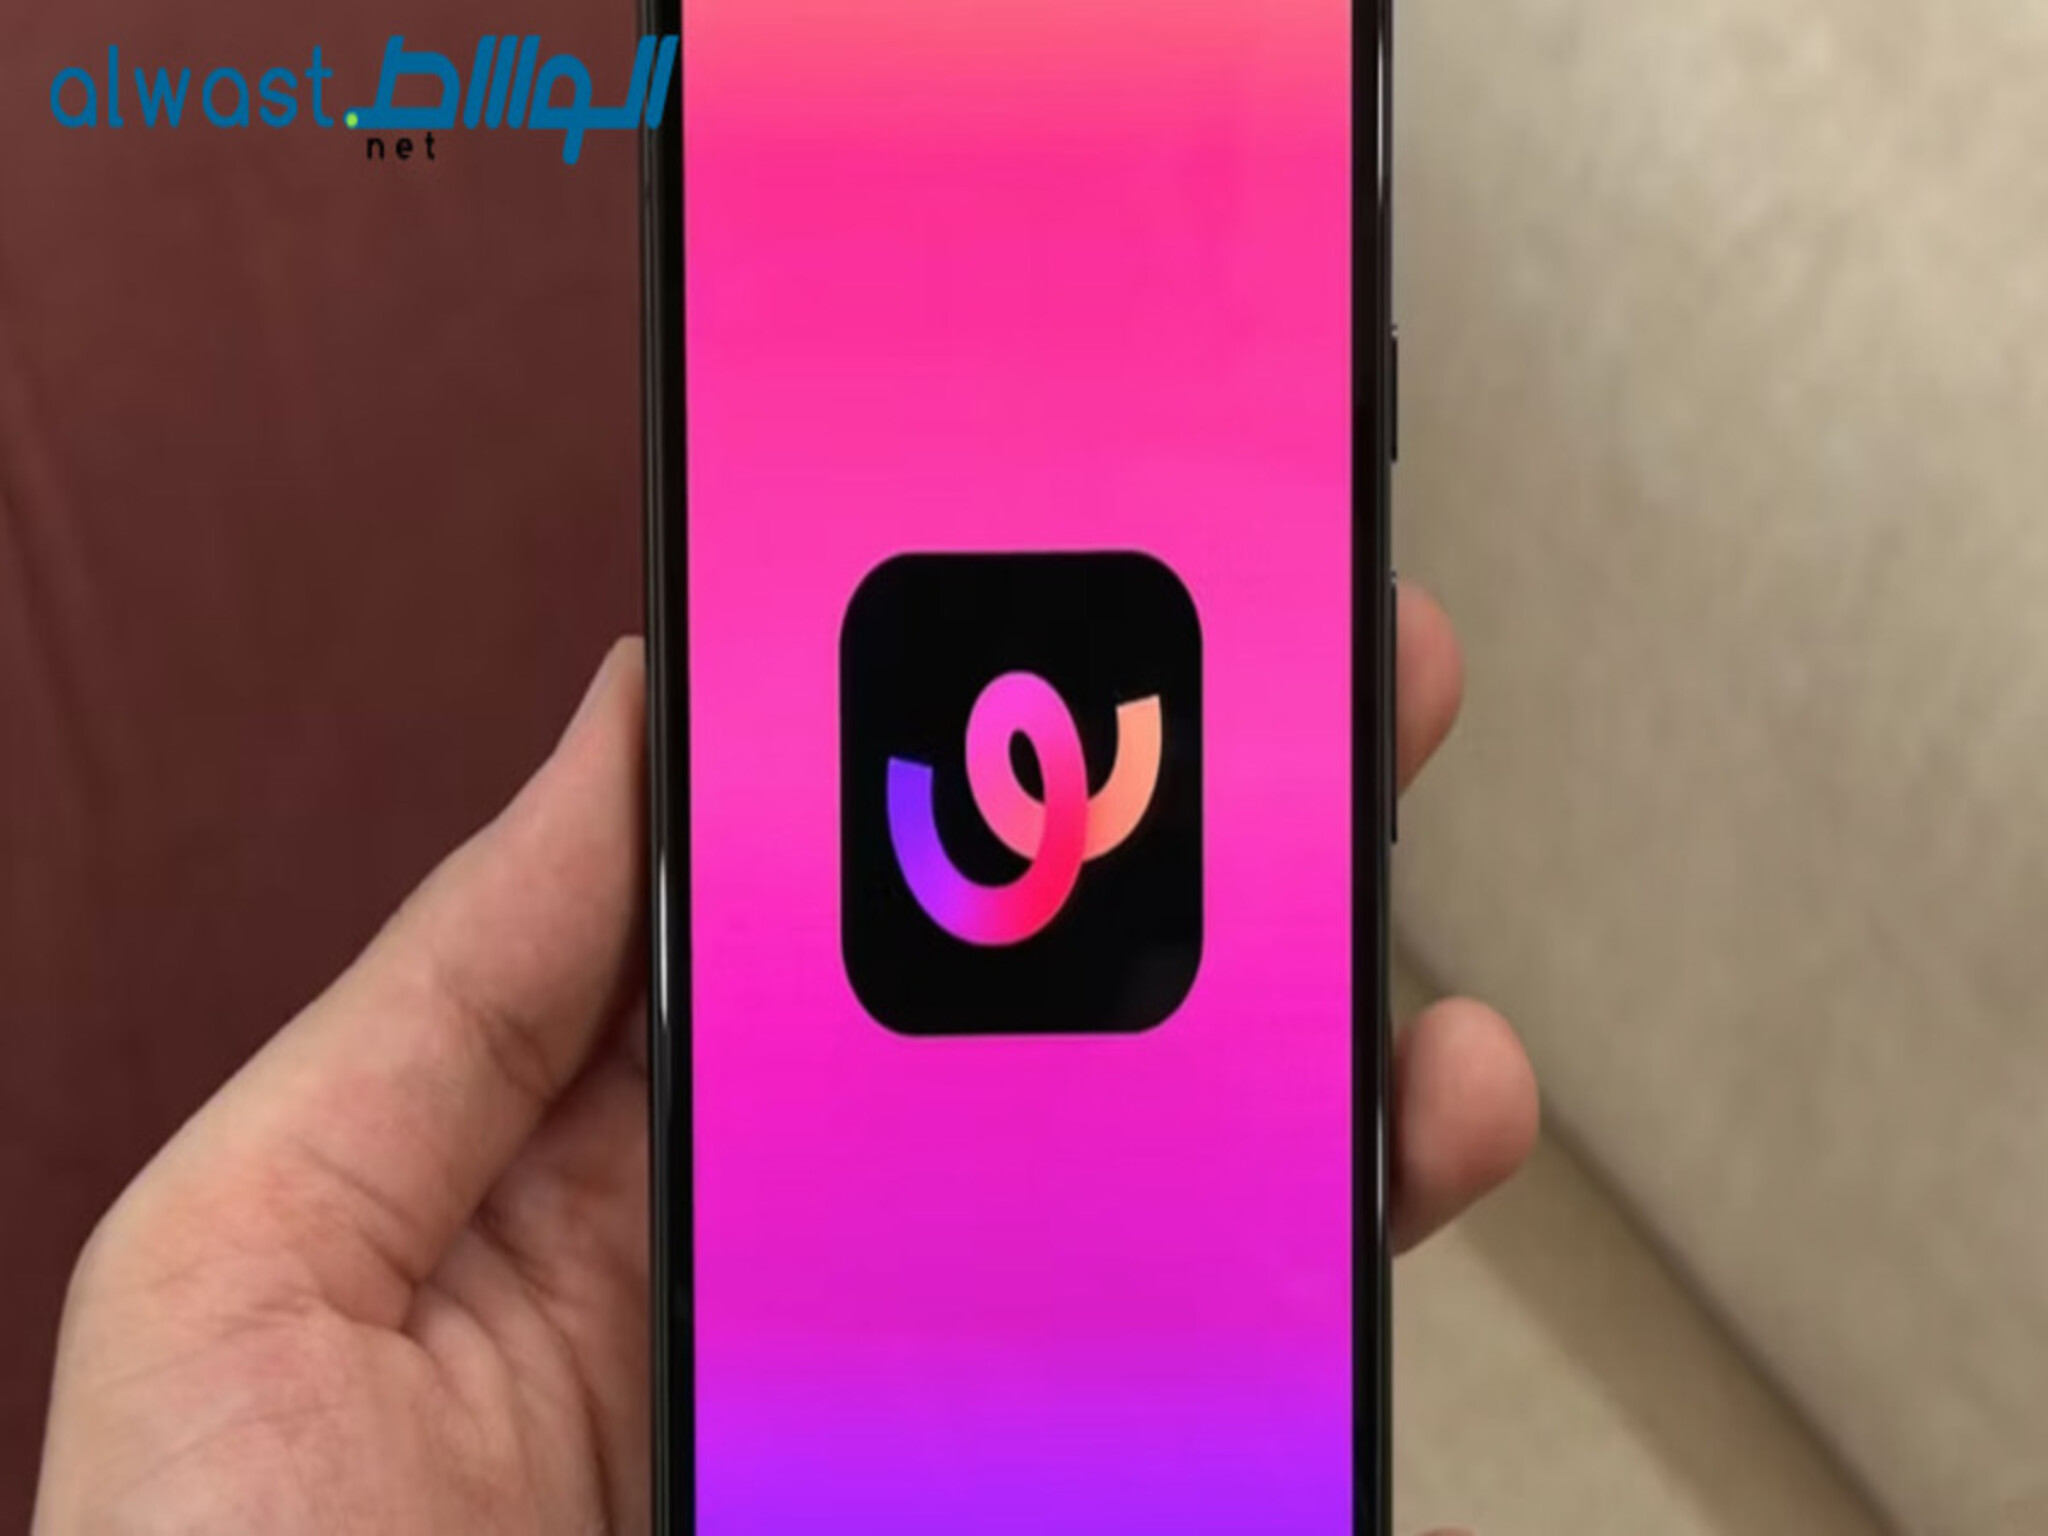 TikTok introduces a new image-sharing app called "Whee"